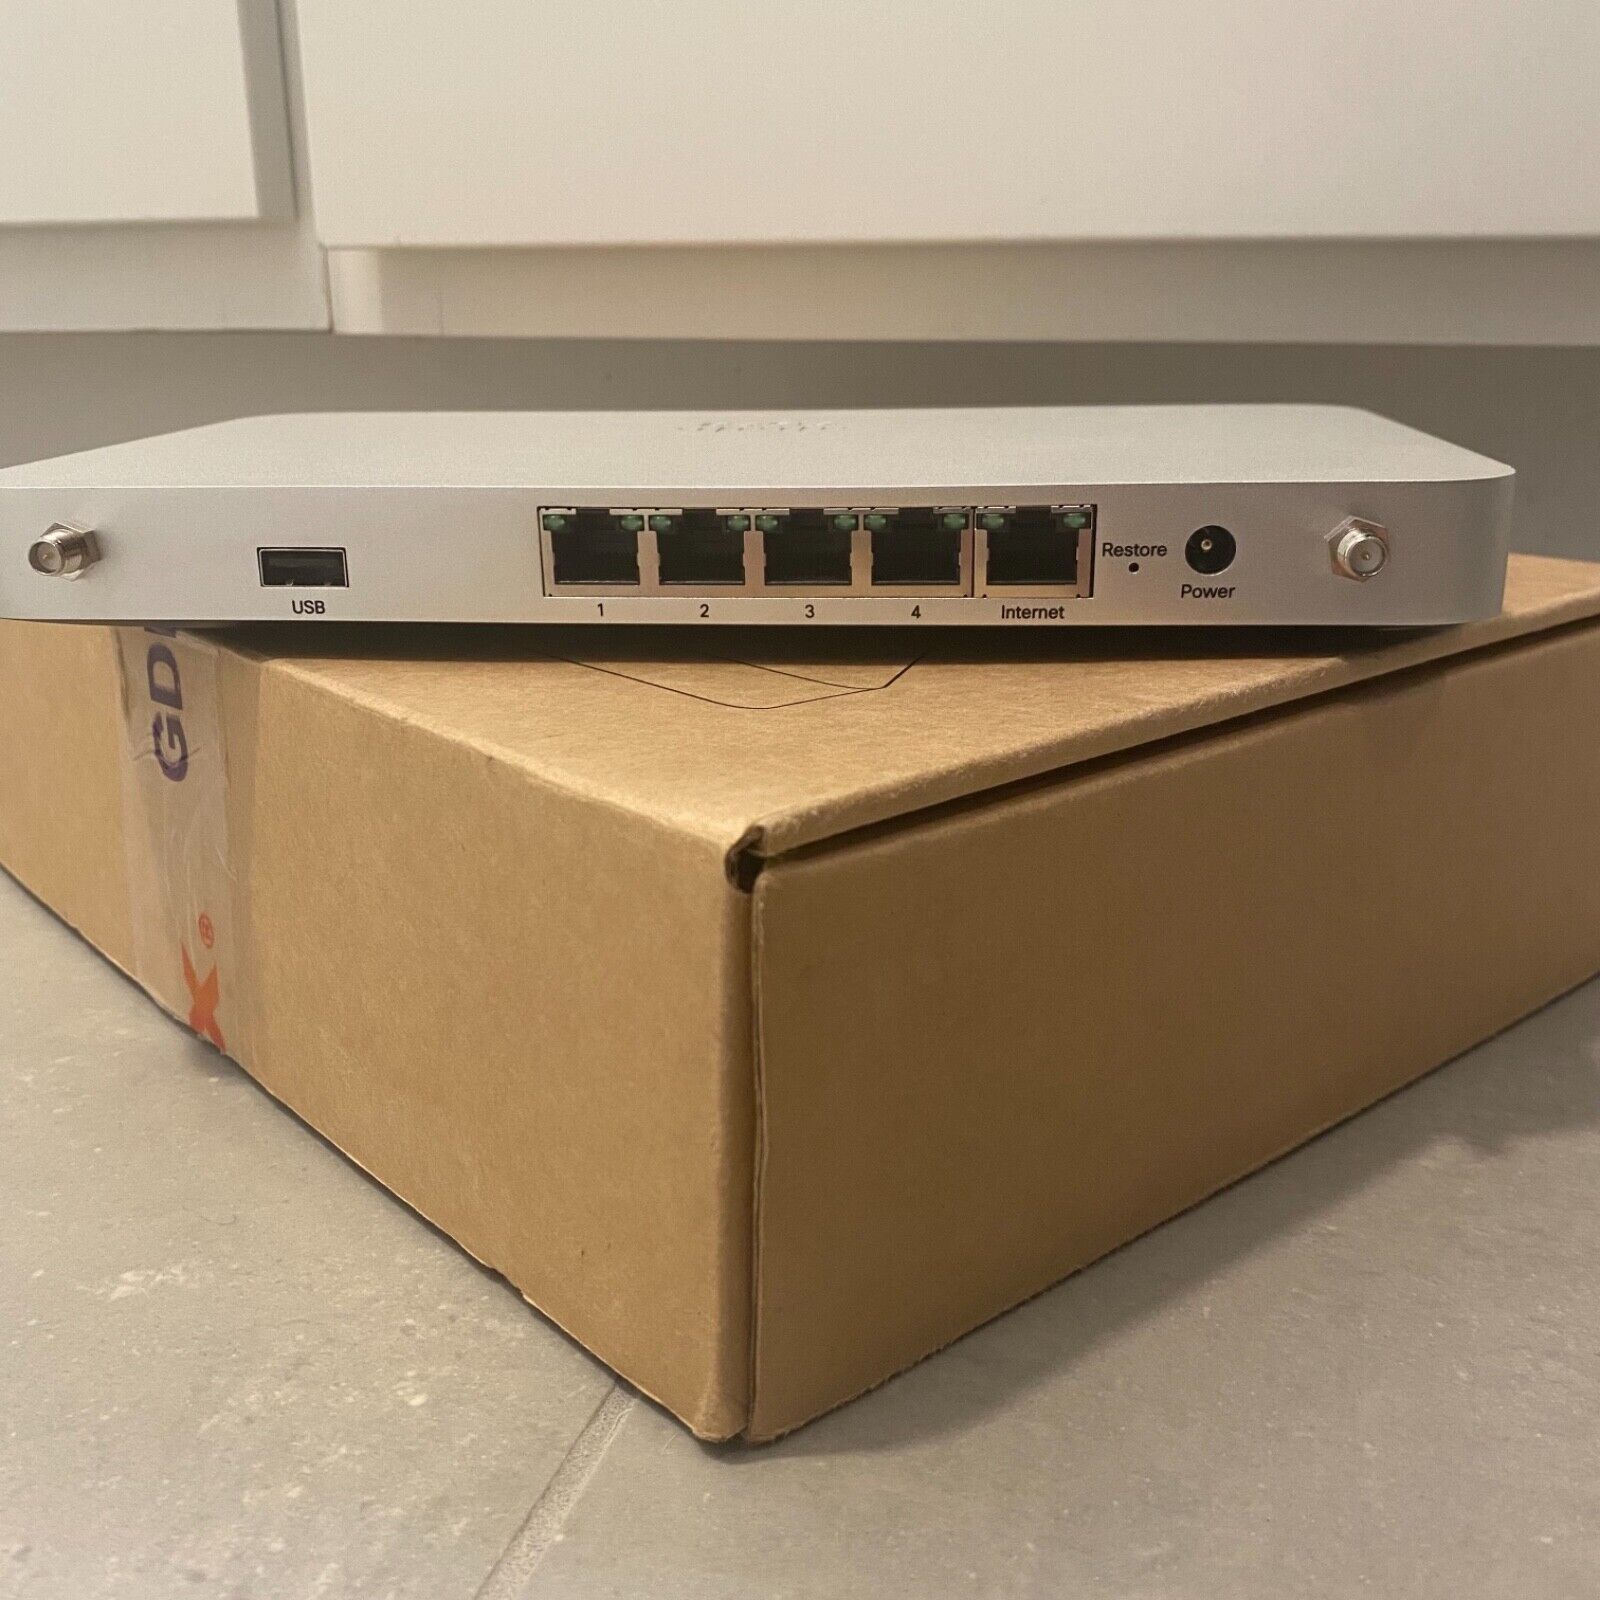 Cisco Meraki MX65W Cloud-Managed Security Firewall and DHCP Device UNCLAIMED